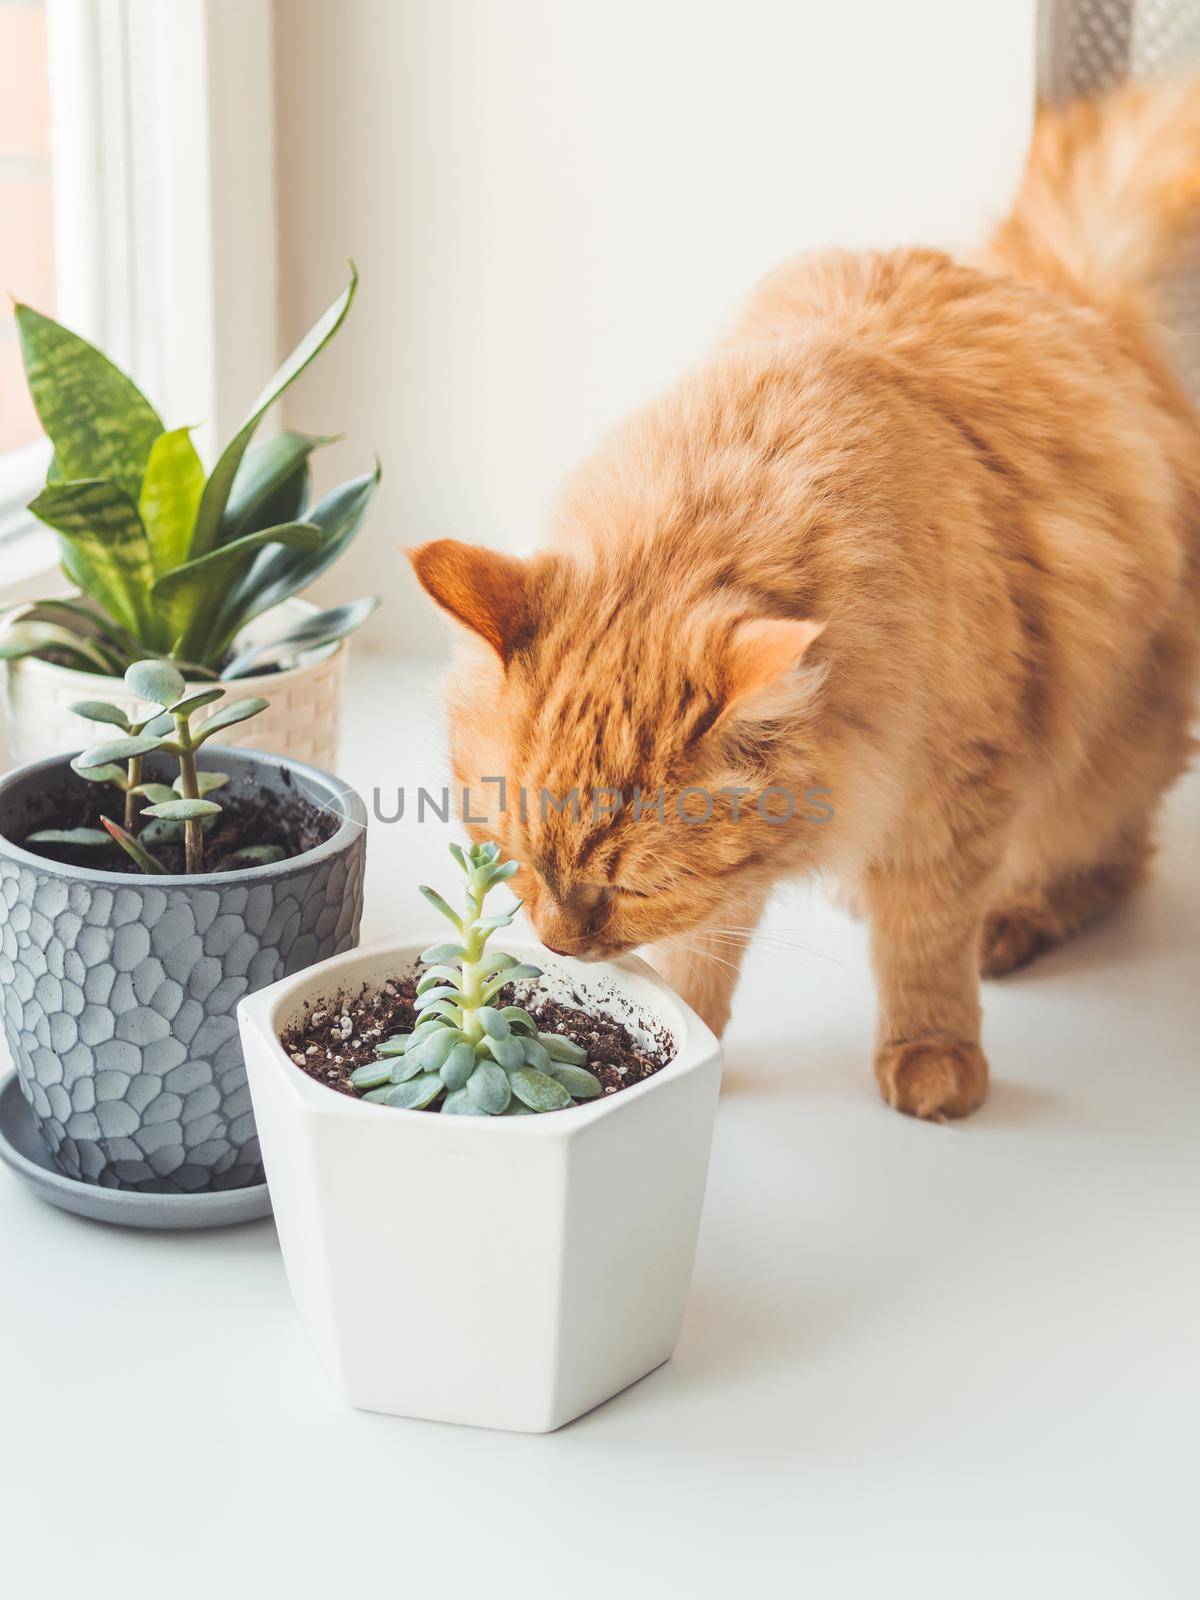 Cute ginger cat sniffs indoors plants. Flower pots with Crassula and Sansevieria. Fluffy pet smells succulent plants on white window sill. Peaceful botanical hobby. Gardening at home. by aksenovko